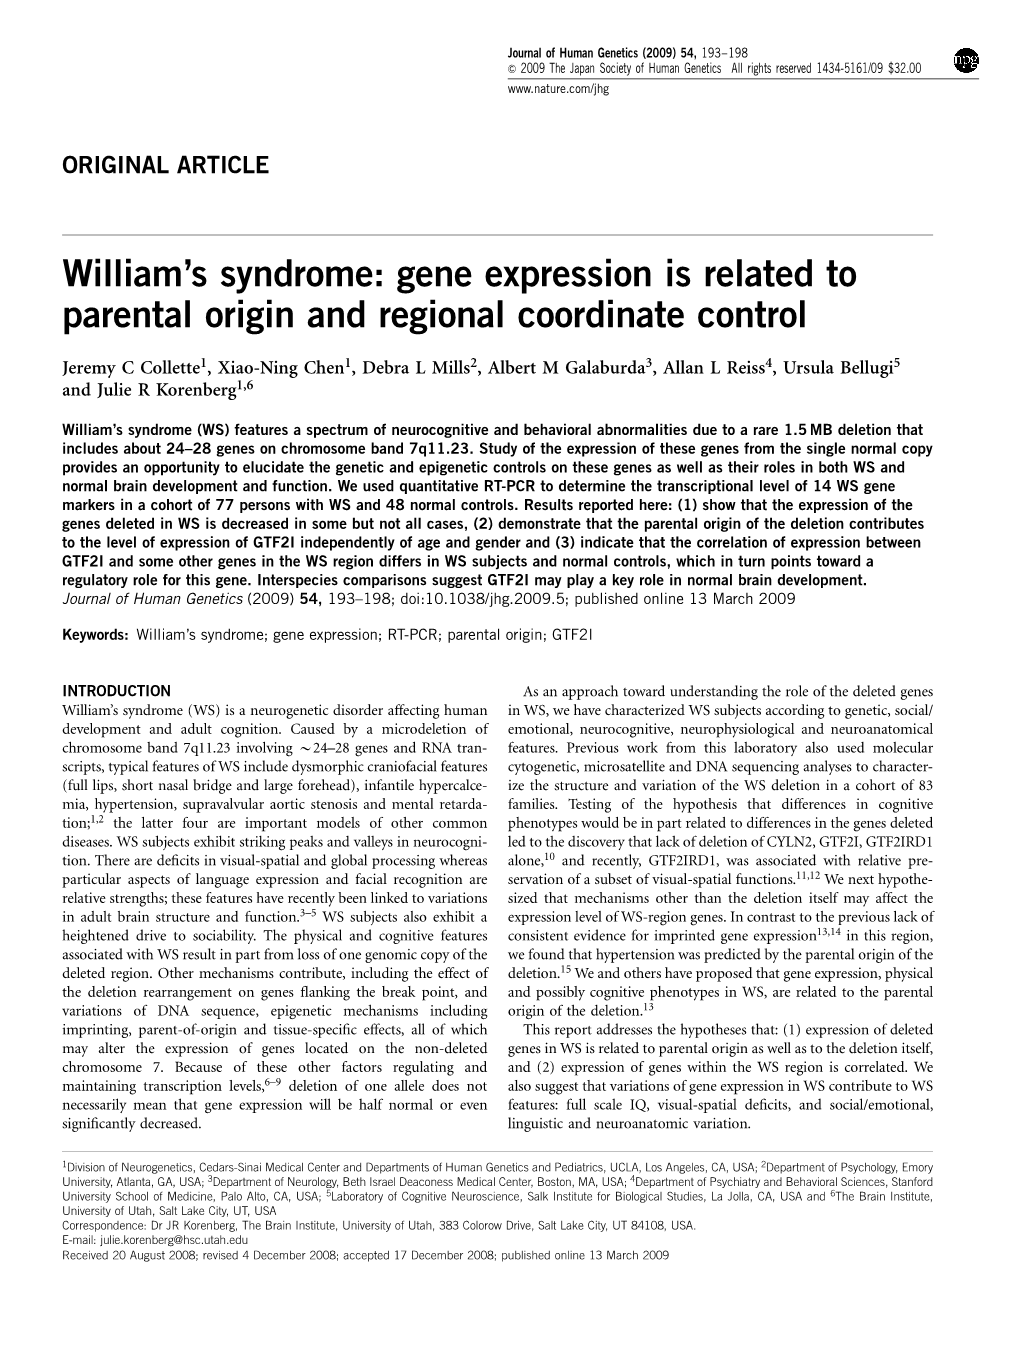 Gene Expression Is Related to Parental Origin and Regional Coordinate Control